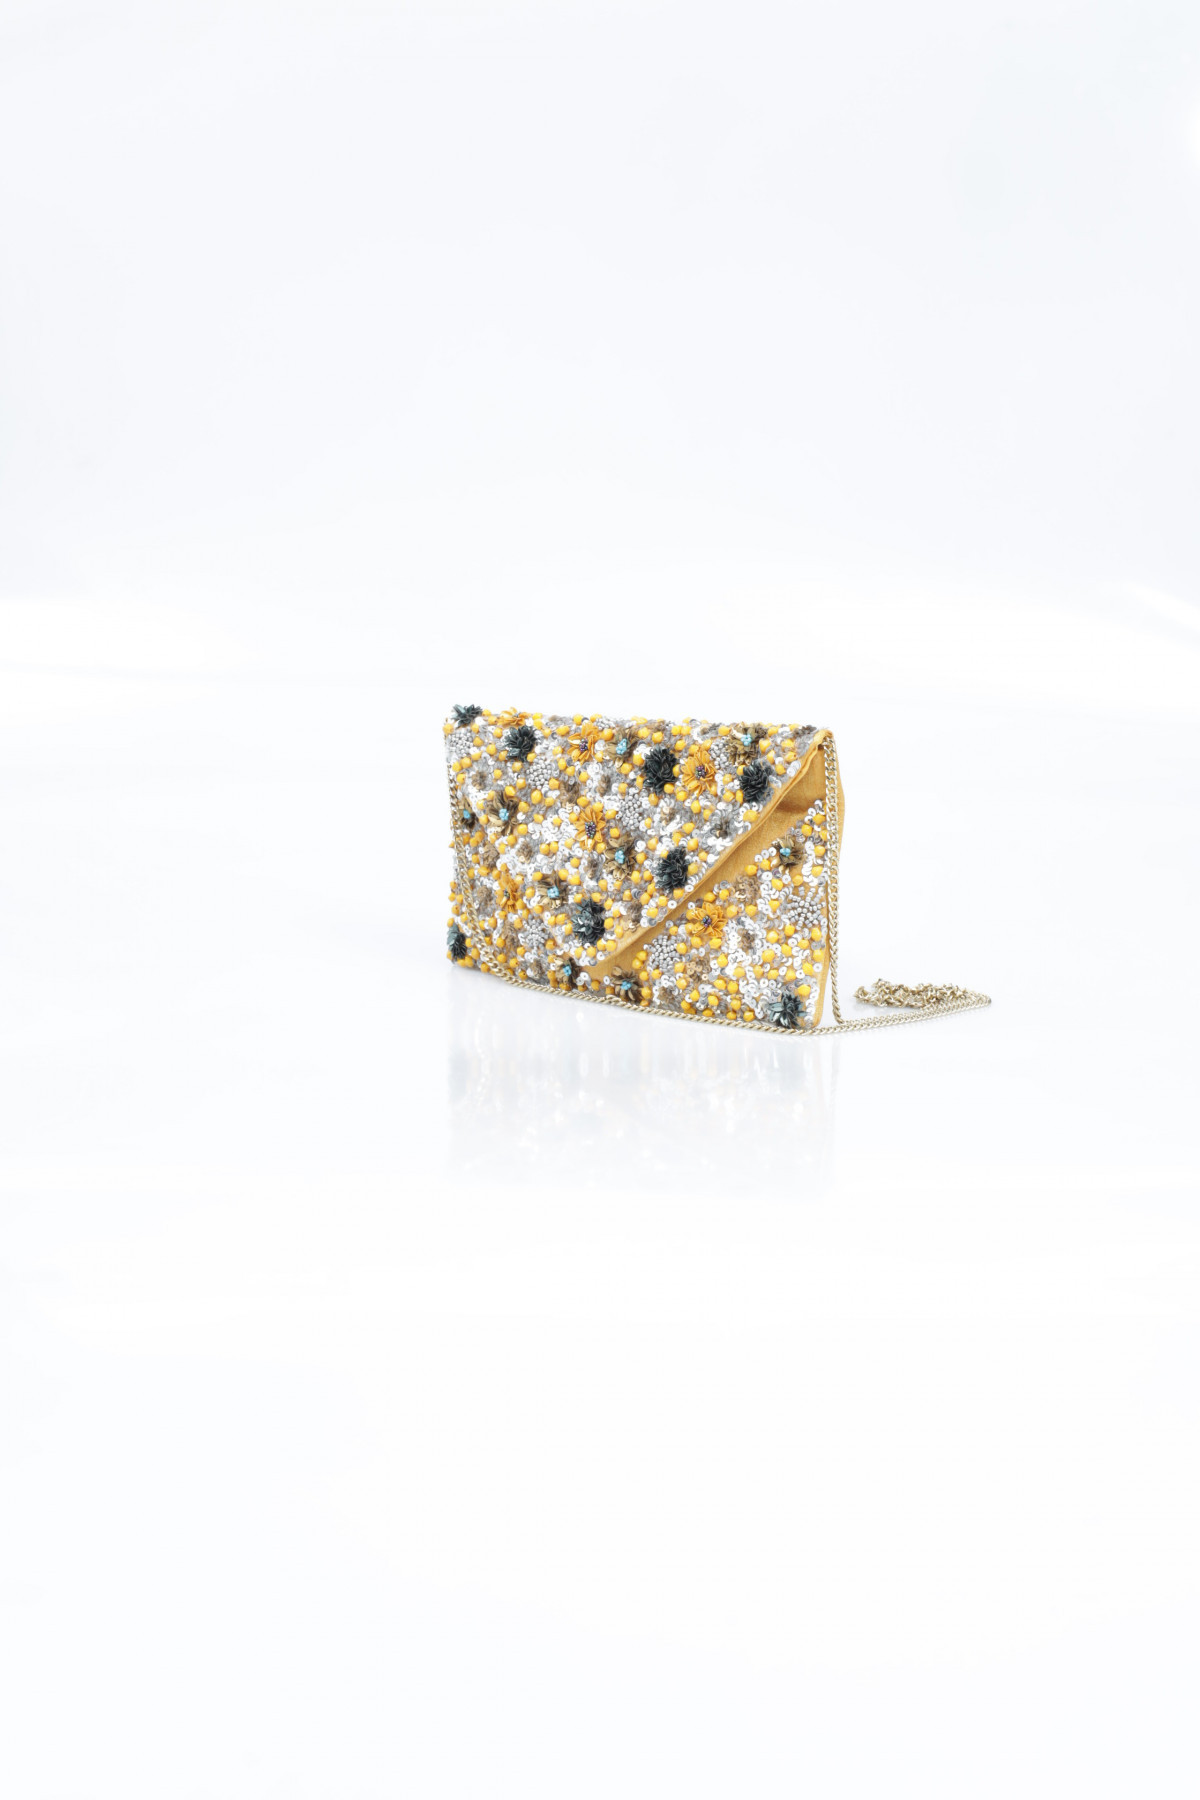 Envelope Clutch Bag with Sequins + Beads Application